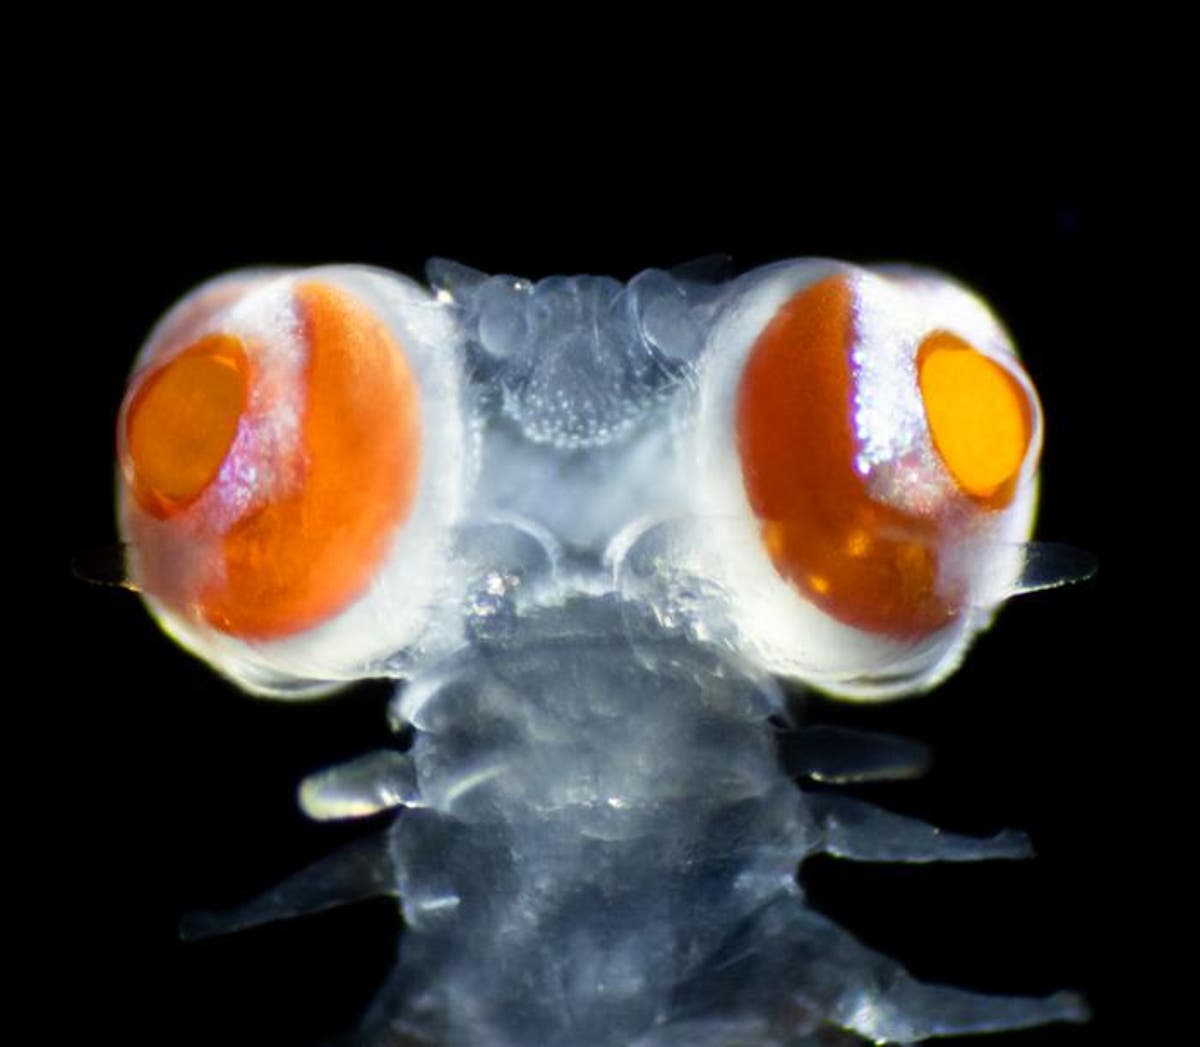 Marine worm with enormous eyes 20 times size of head leaves scientists perplexed [Video]